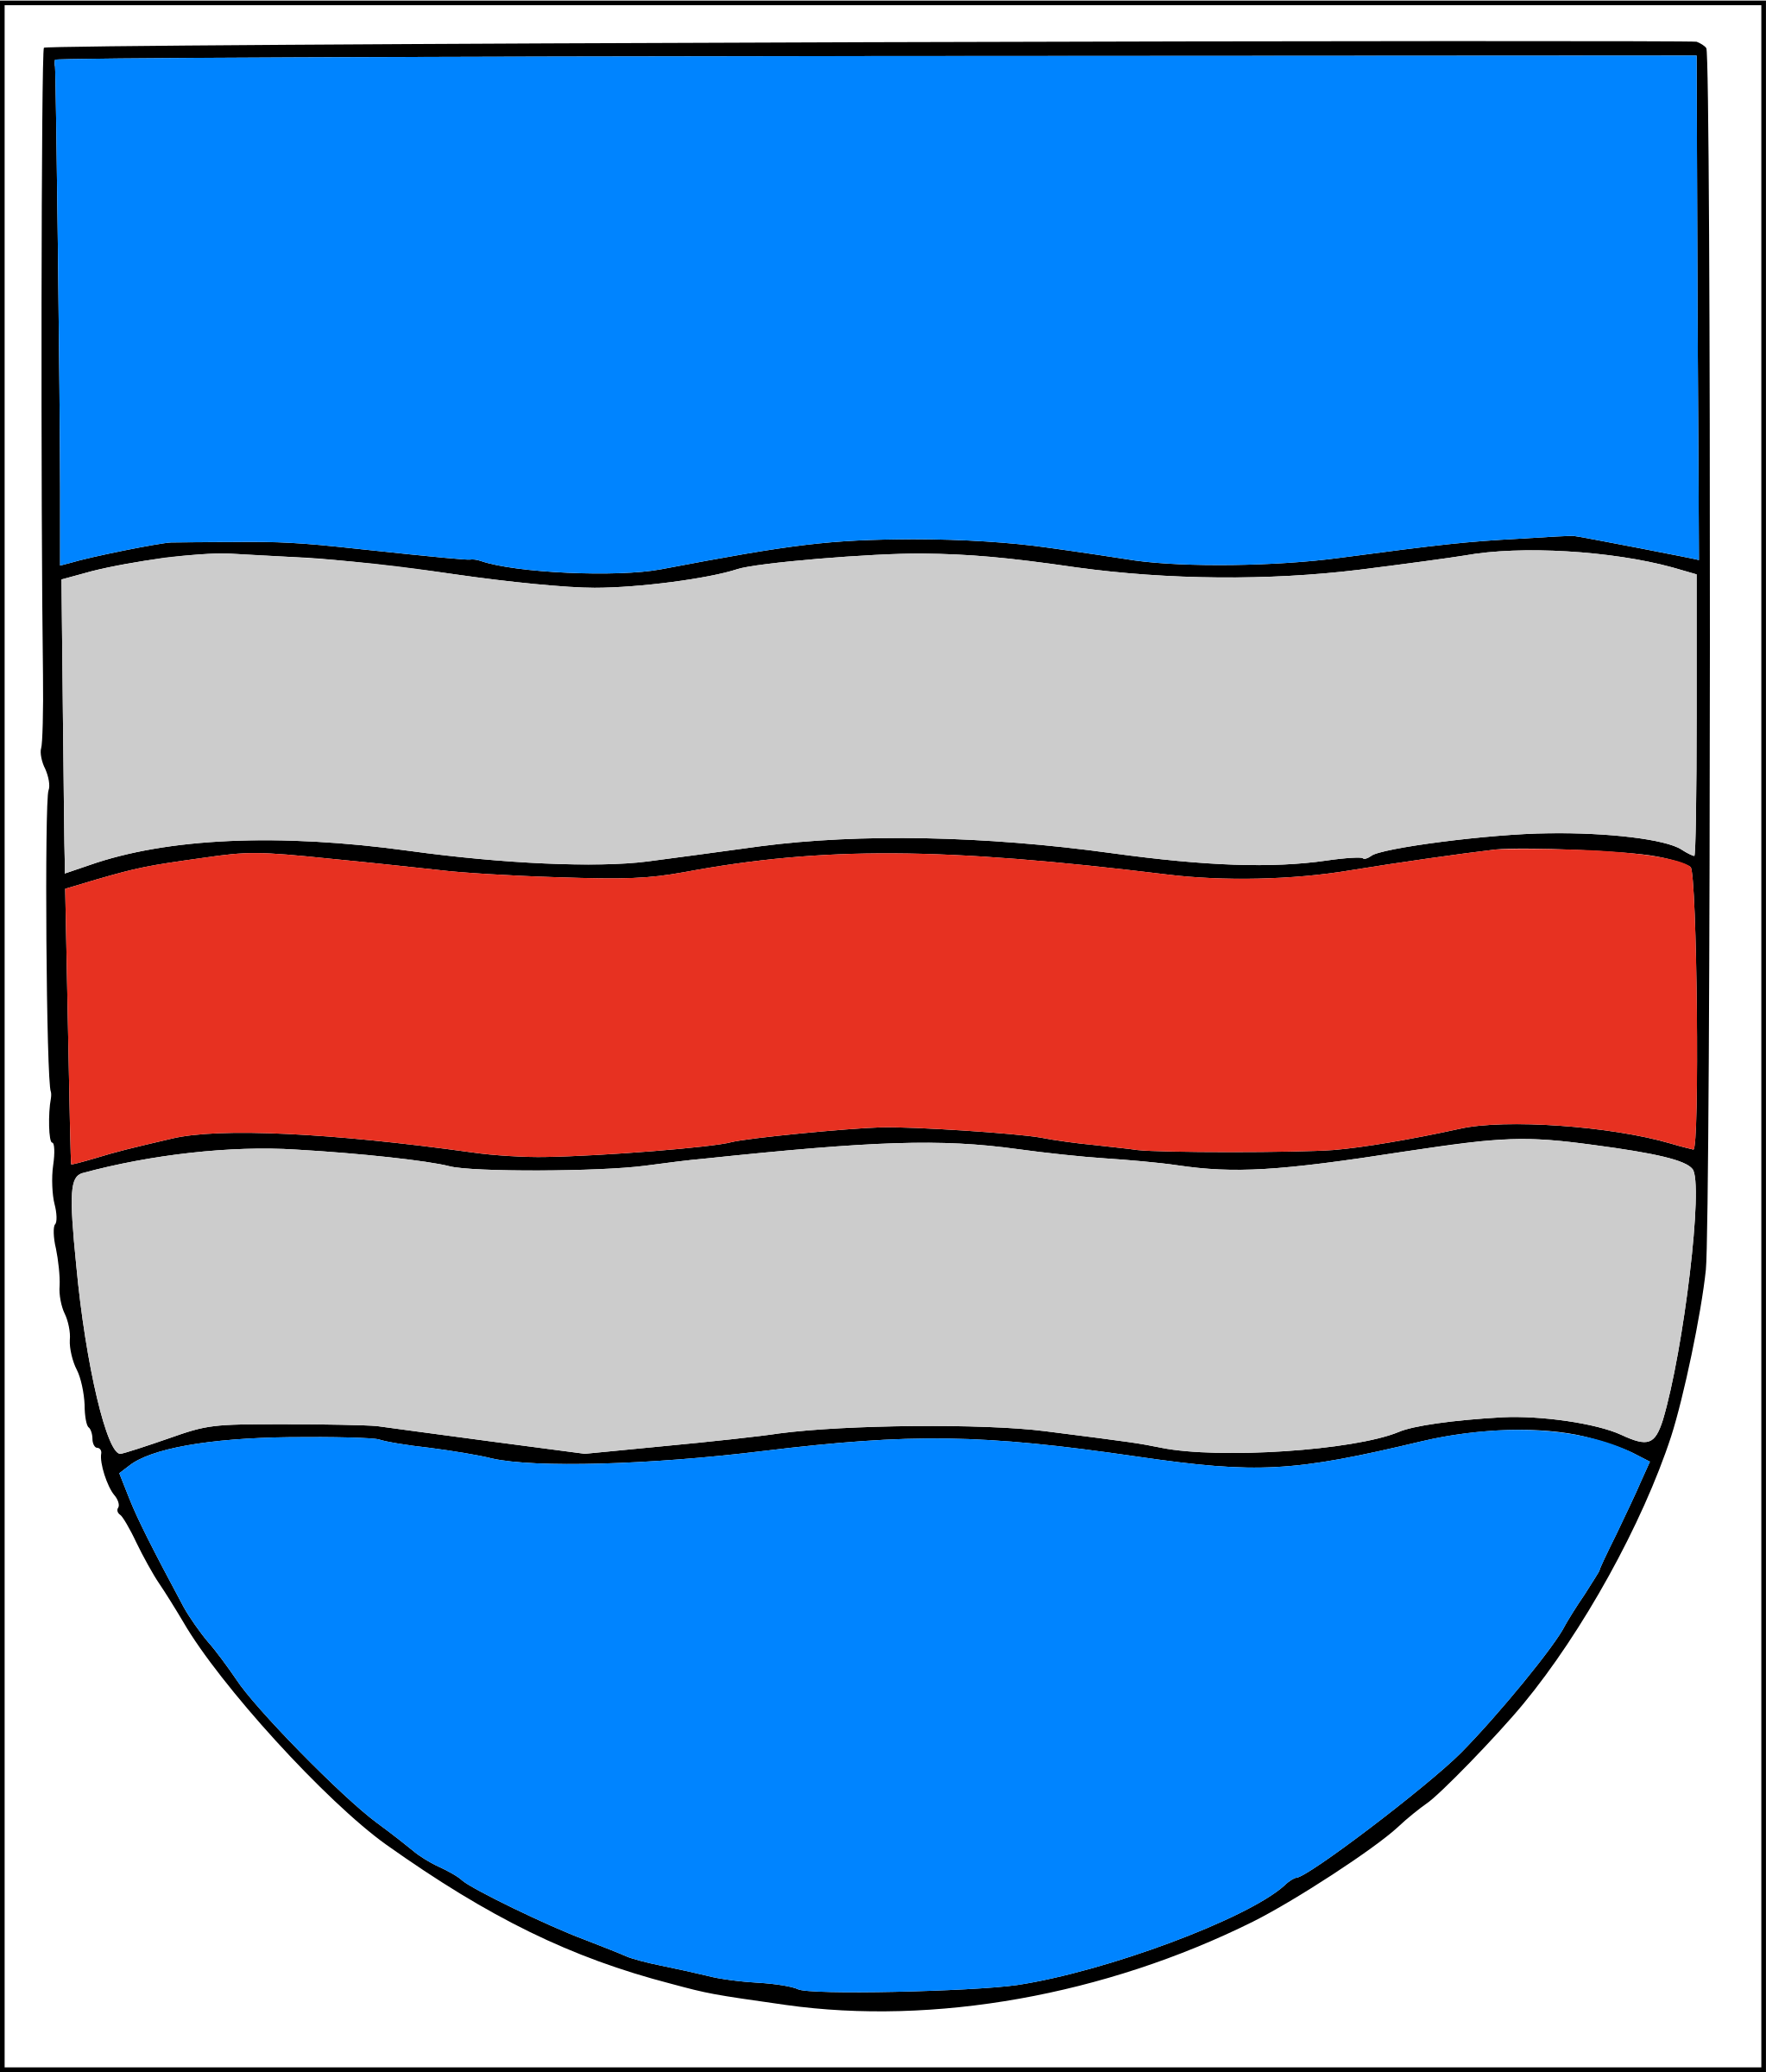 Medelpad Coat Of Arms By Liftarn